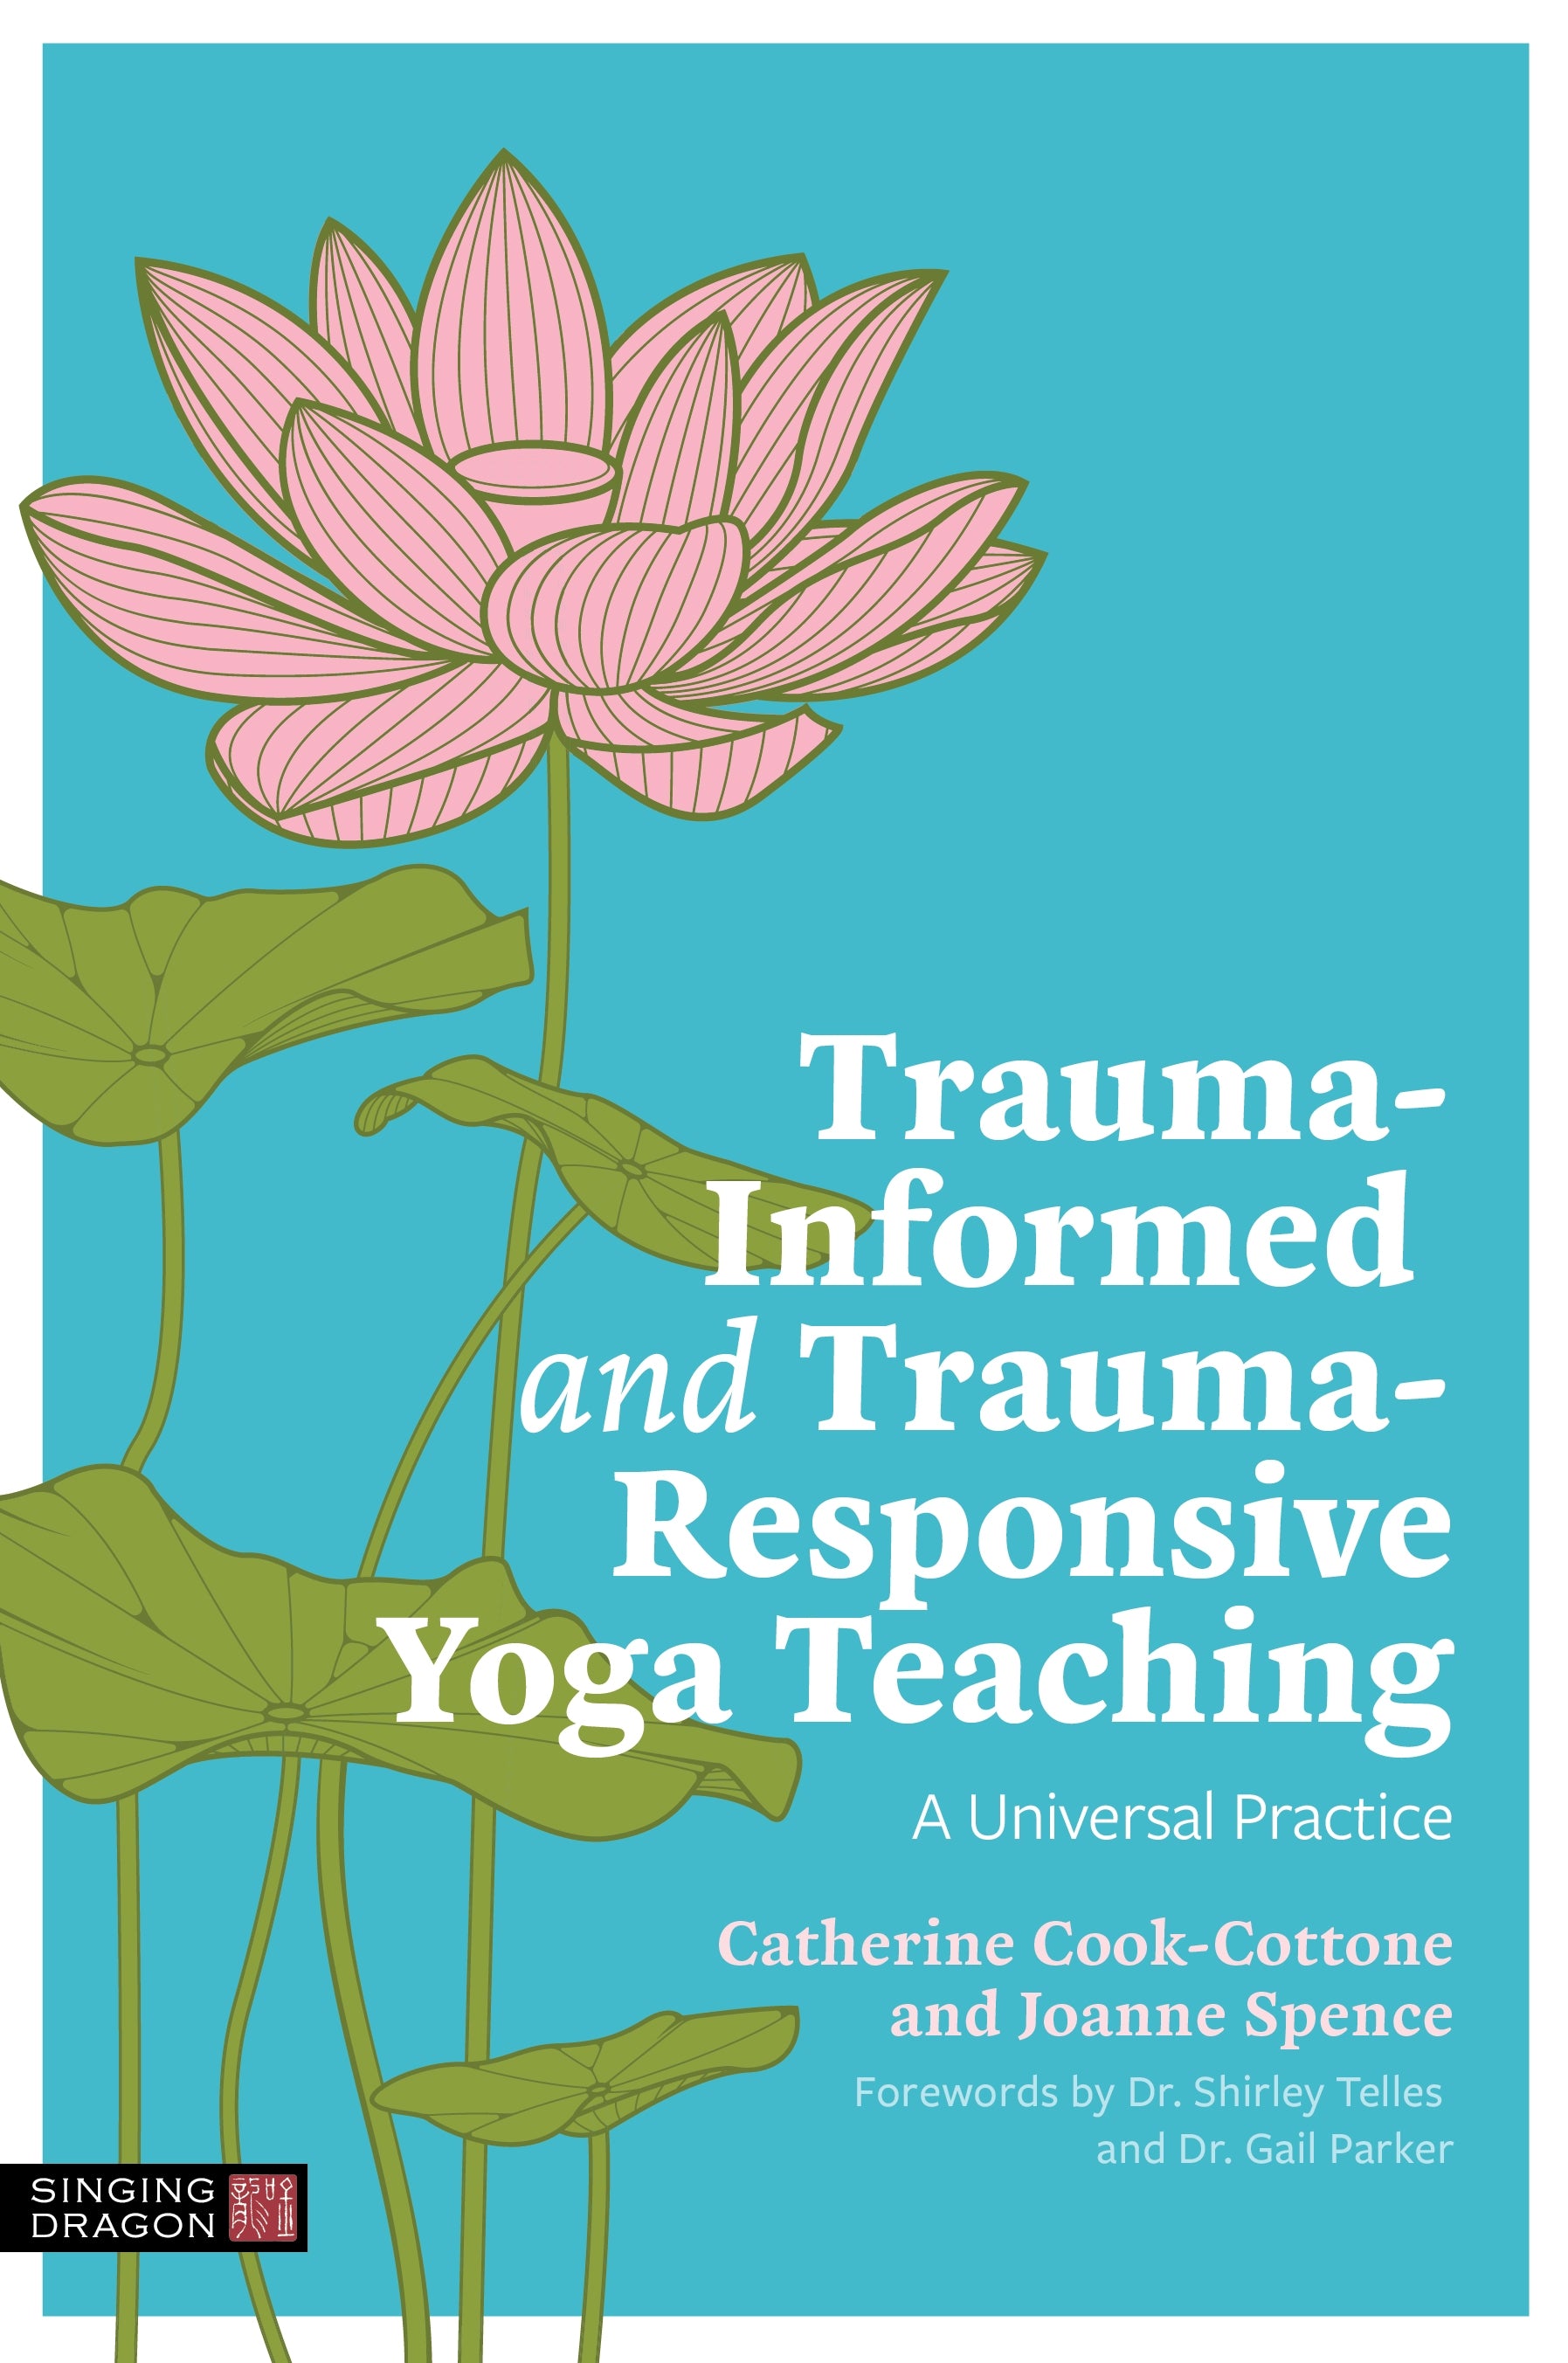 Trauma-Informed and Trauma-Responsive Yoga Teaching by Gail Parker, Shirley Telles, Catherine Cook-Cottone, Joanne Spence